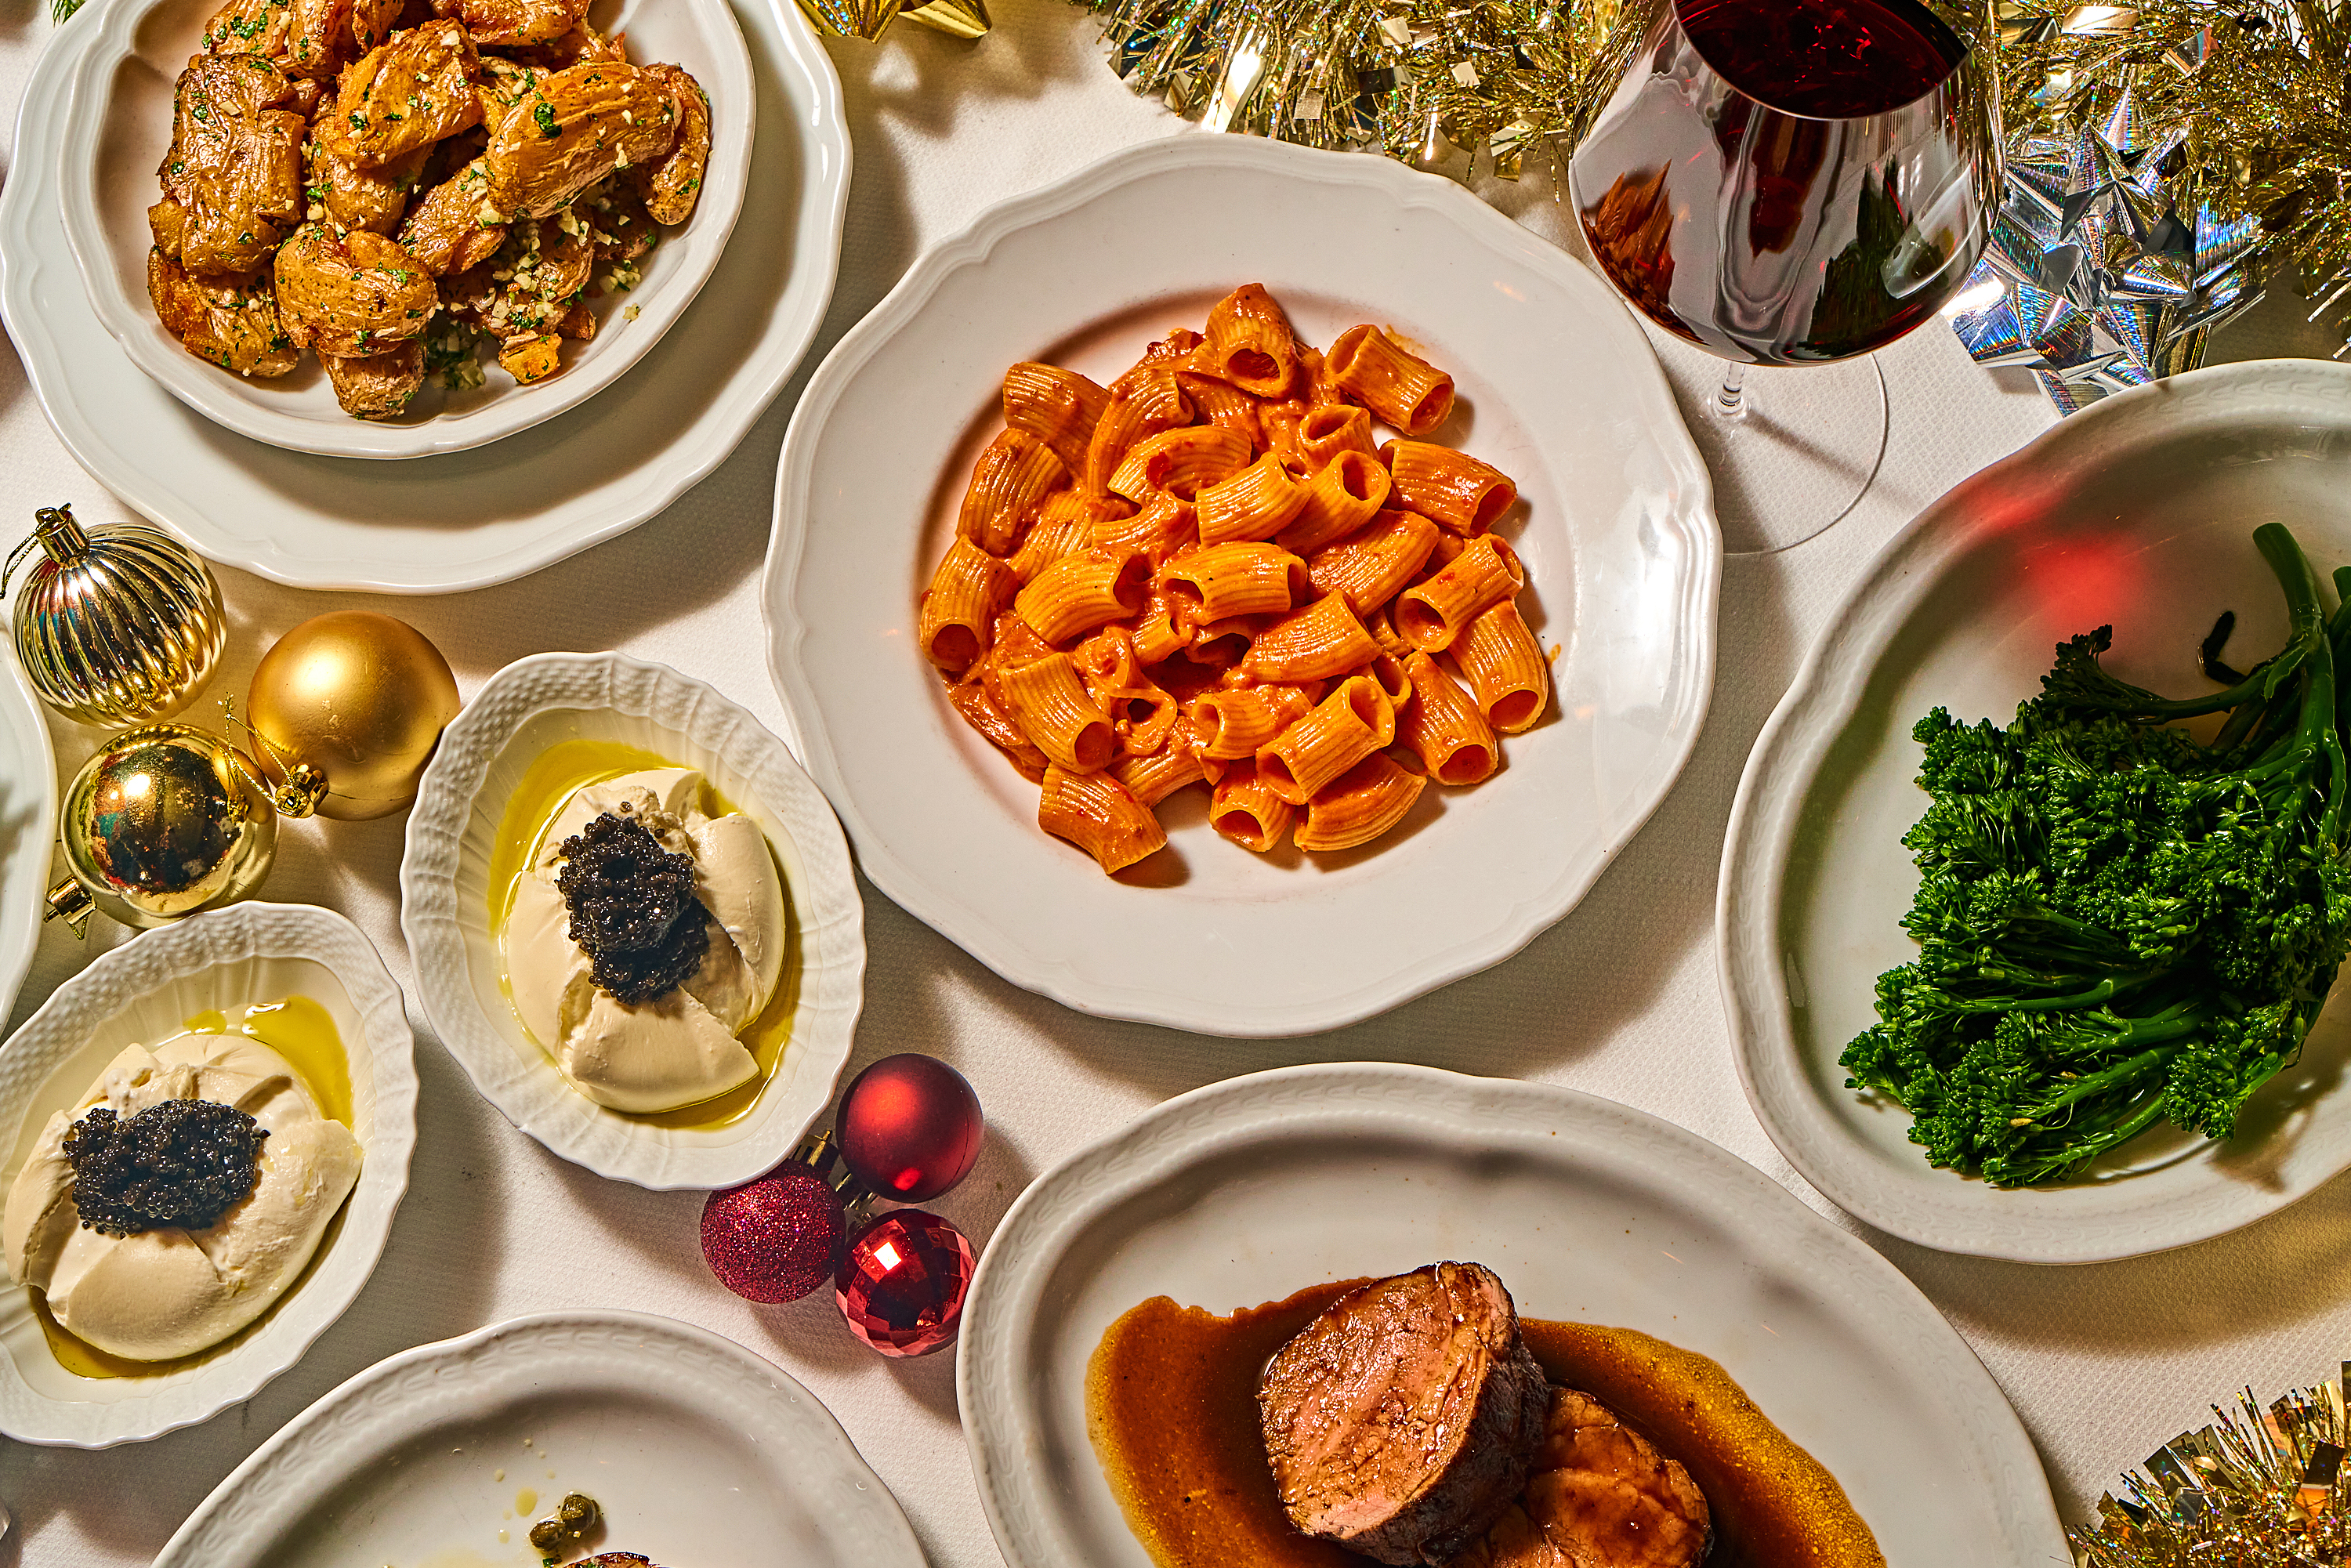 Selection from Carbone's Holiday Menu